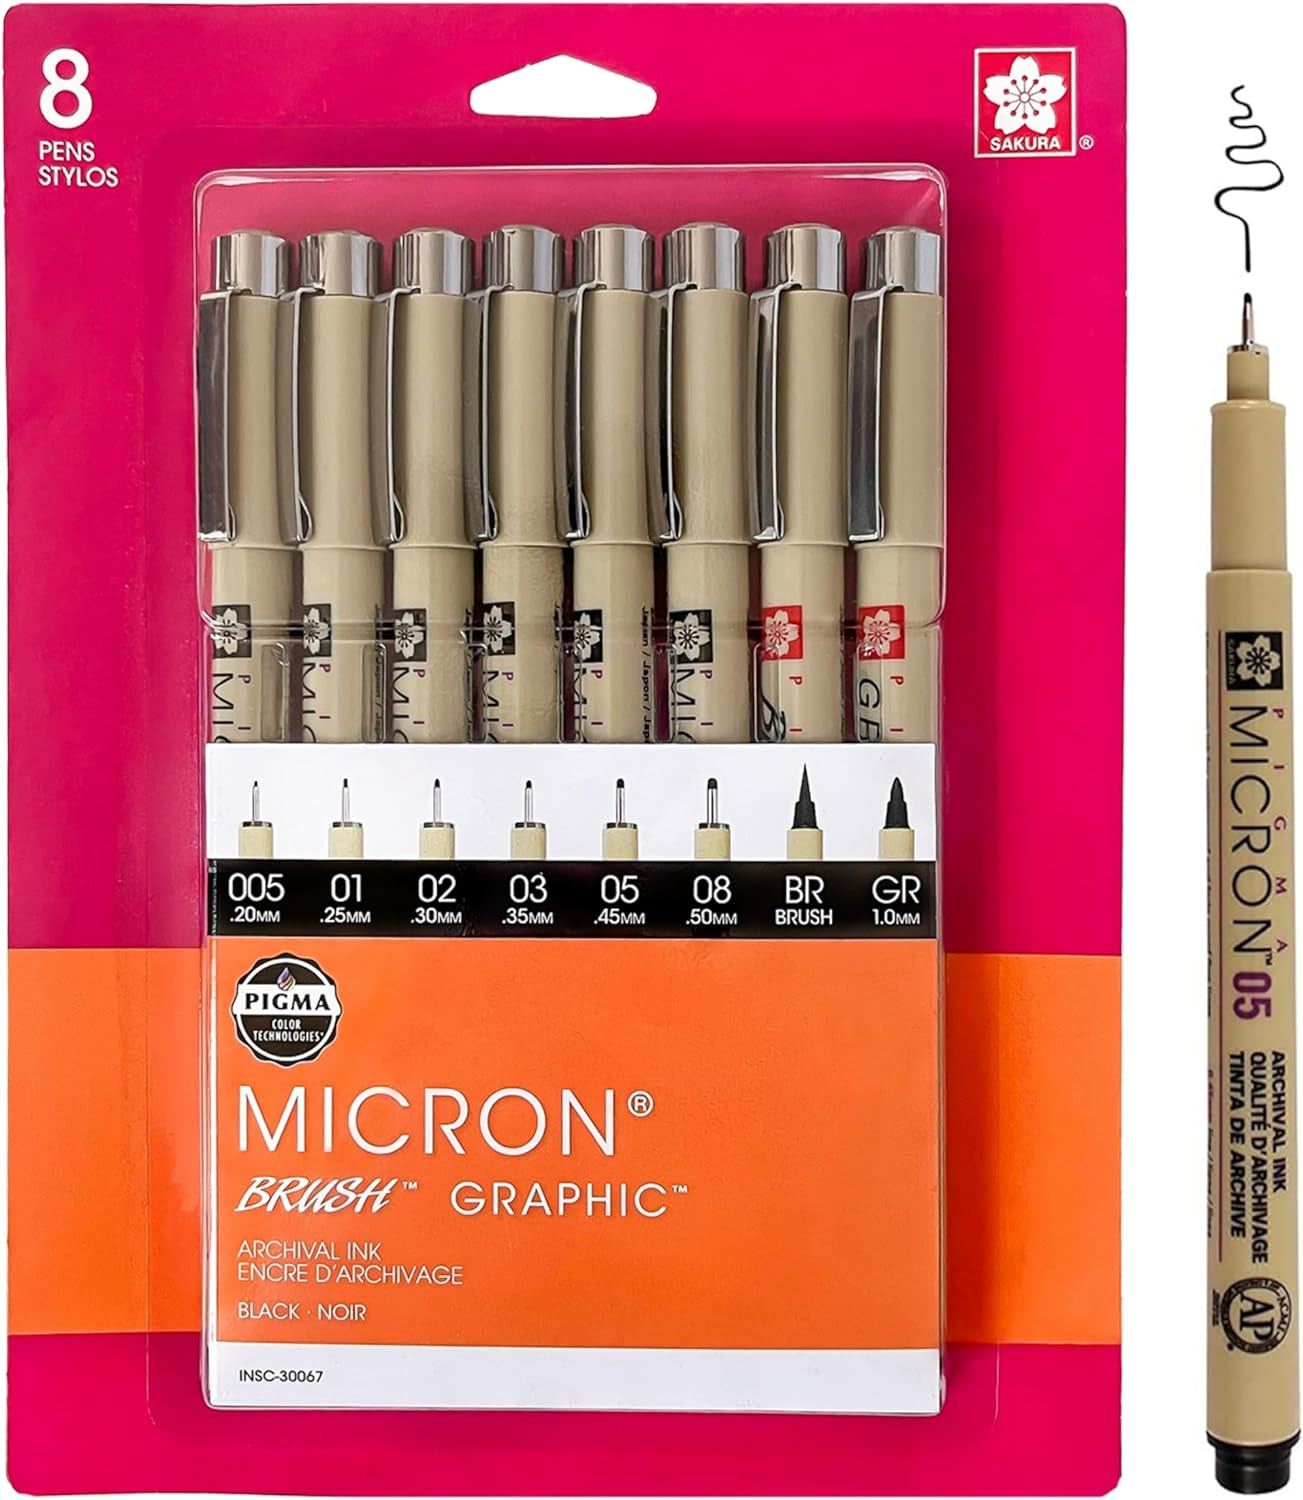 Pigma Micron Fineliner Pens - Archival Black Ink Pens - Pens for Writing, Drawing, or Journaling - Assorted Point Sizes - 8 Pack